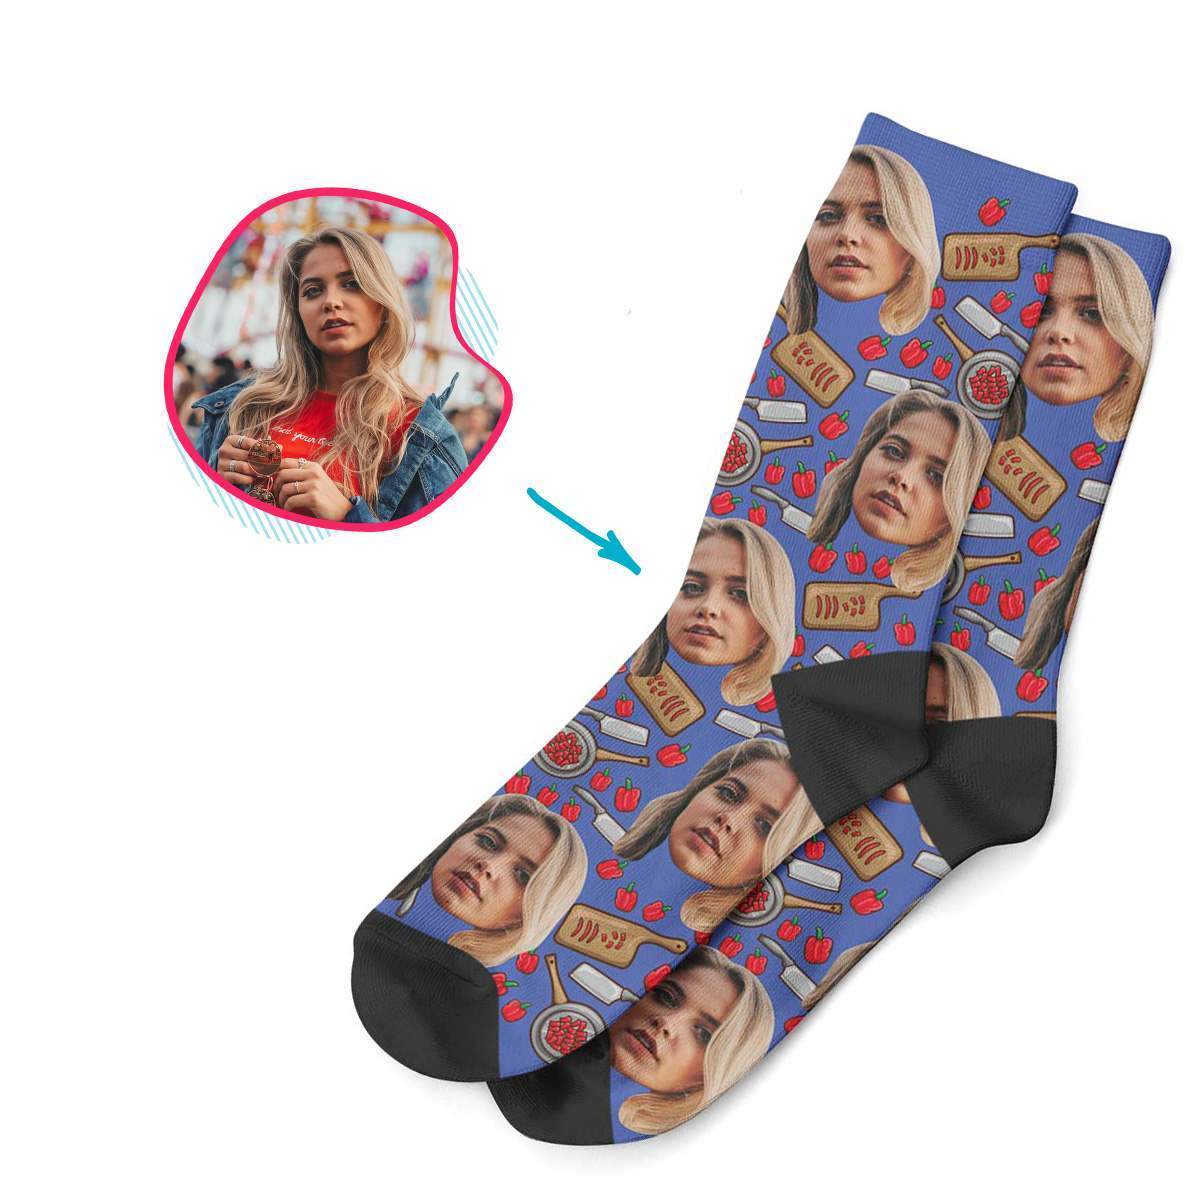 darkblue Сooking socks personalized with photo of face printed on them